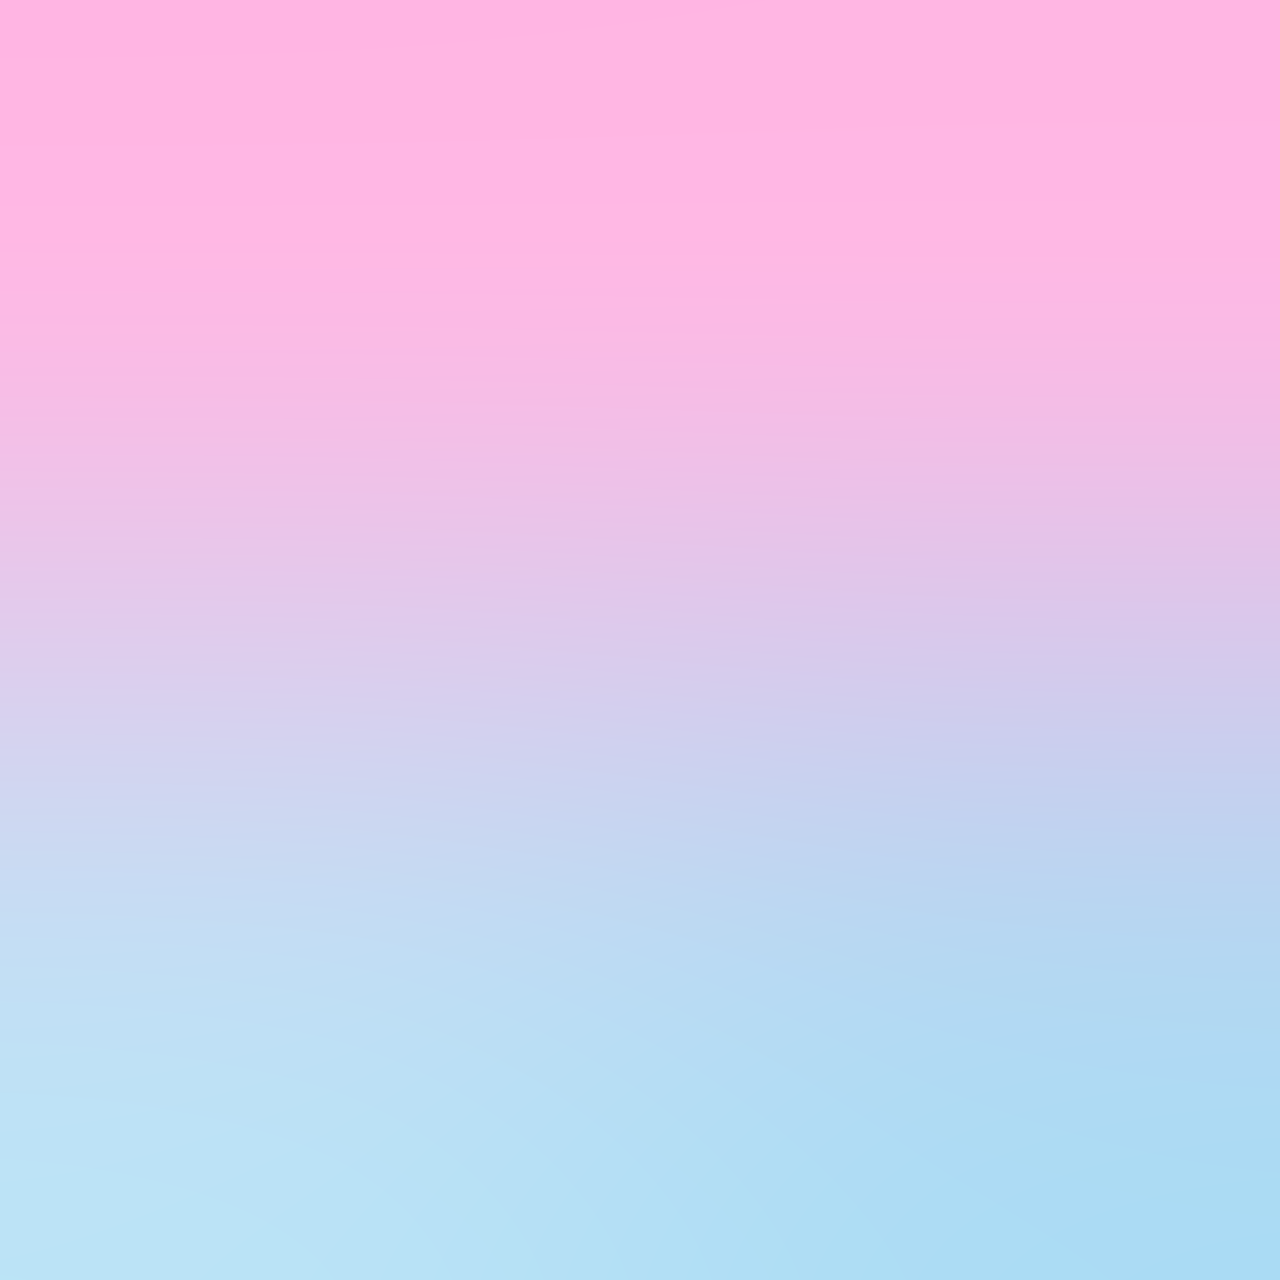 Abstract, Background And Blue - Pastel Background Pink And Blue - HD Wallpaper 